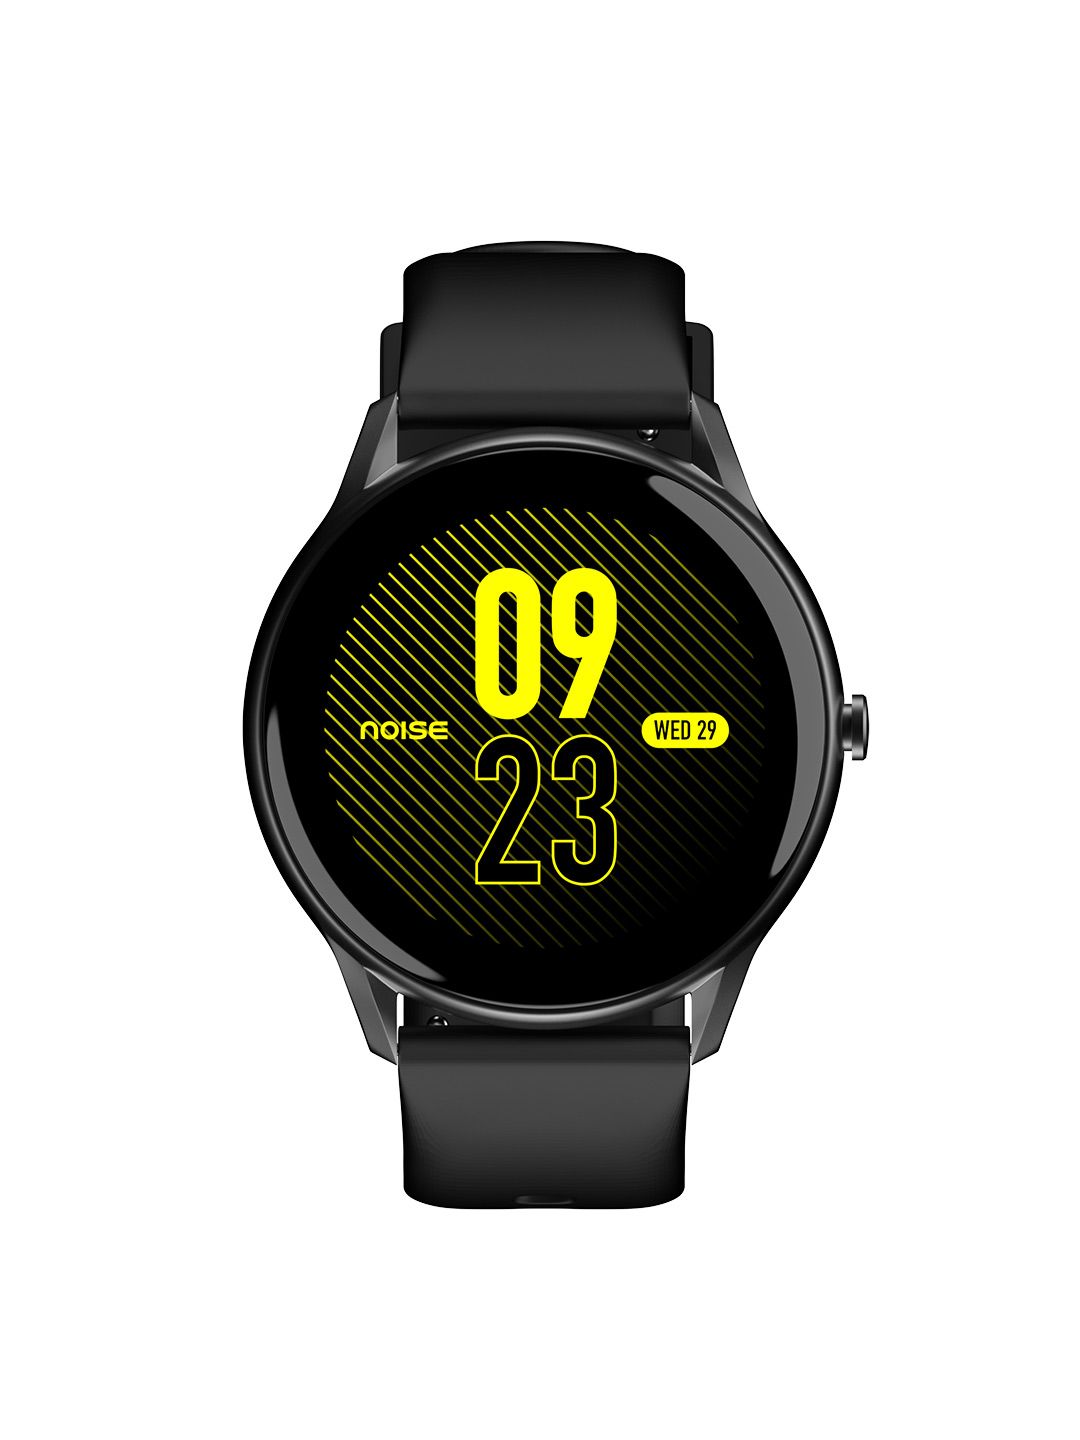 NOISE Fit Core Oxy Smartwatch - Charcoal Black Price in India